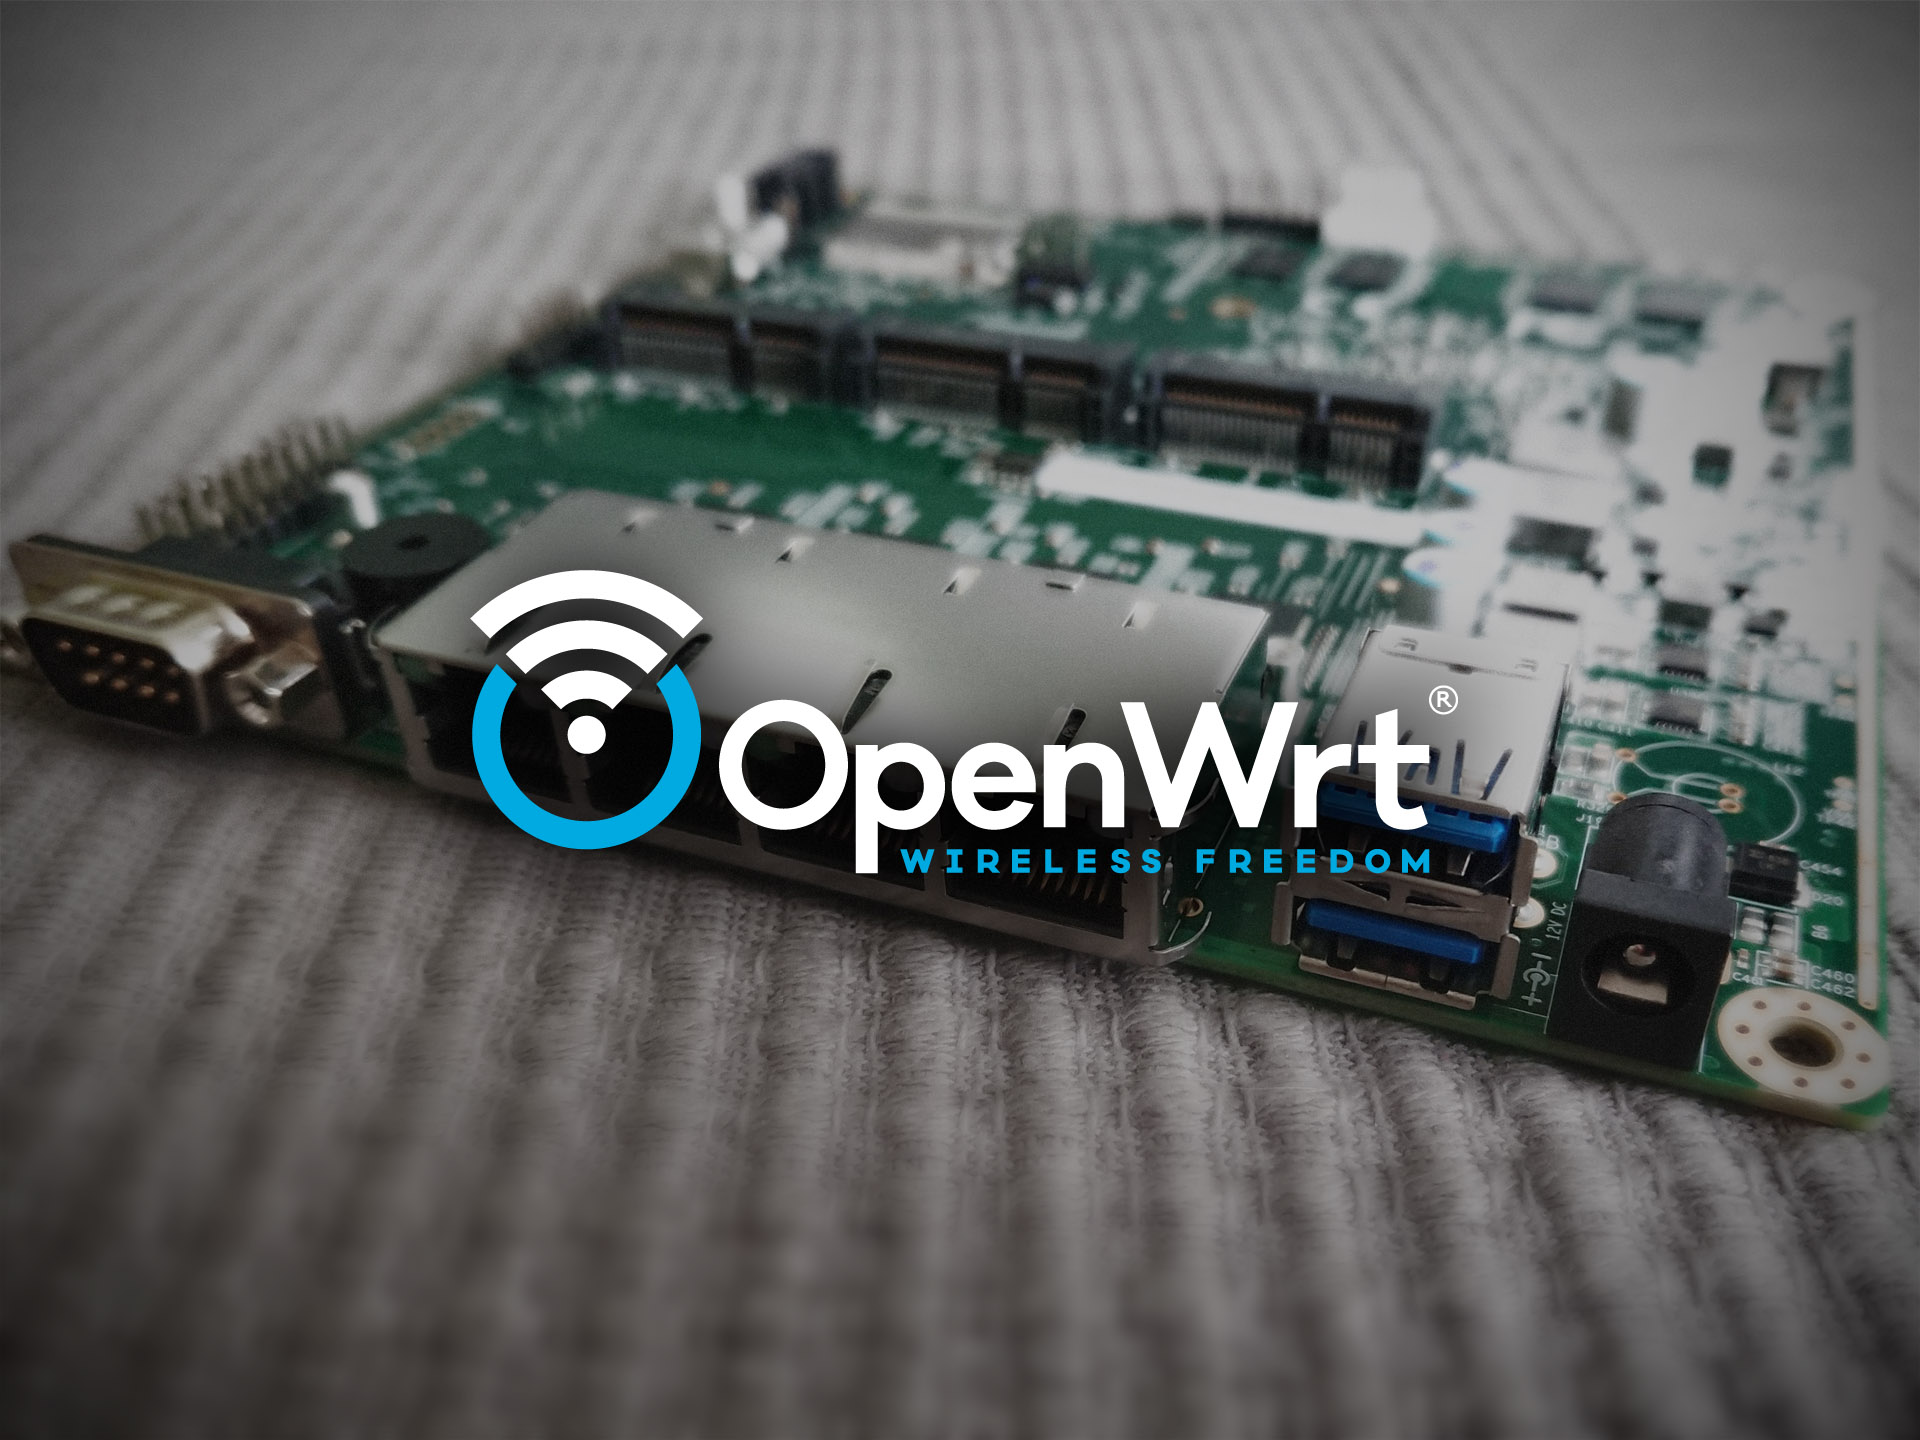 How to extend duration of authentication session in OpenWRT LuCI